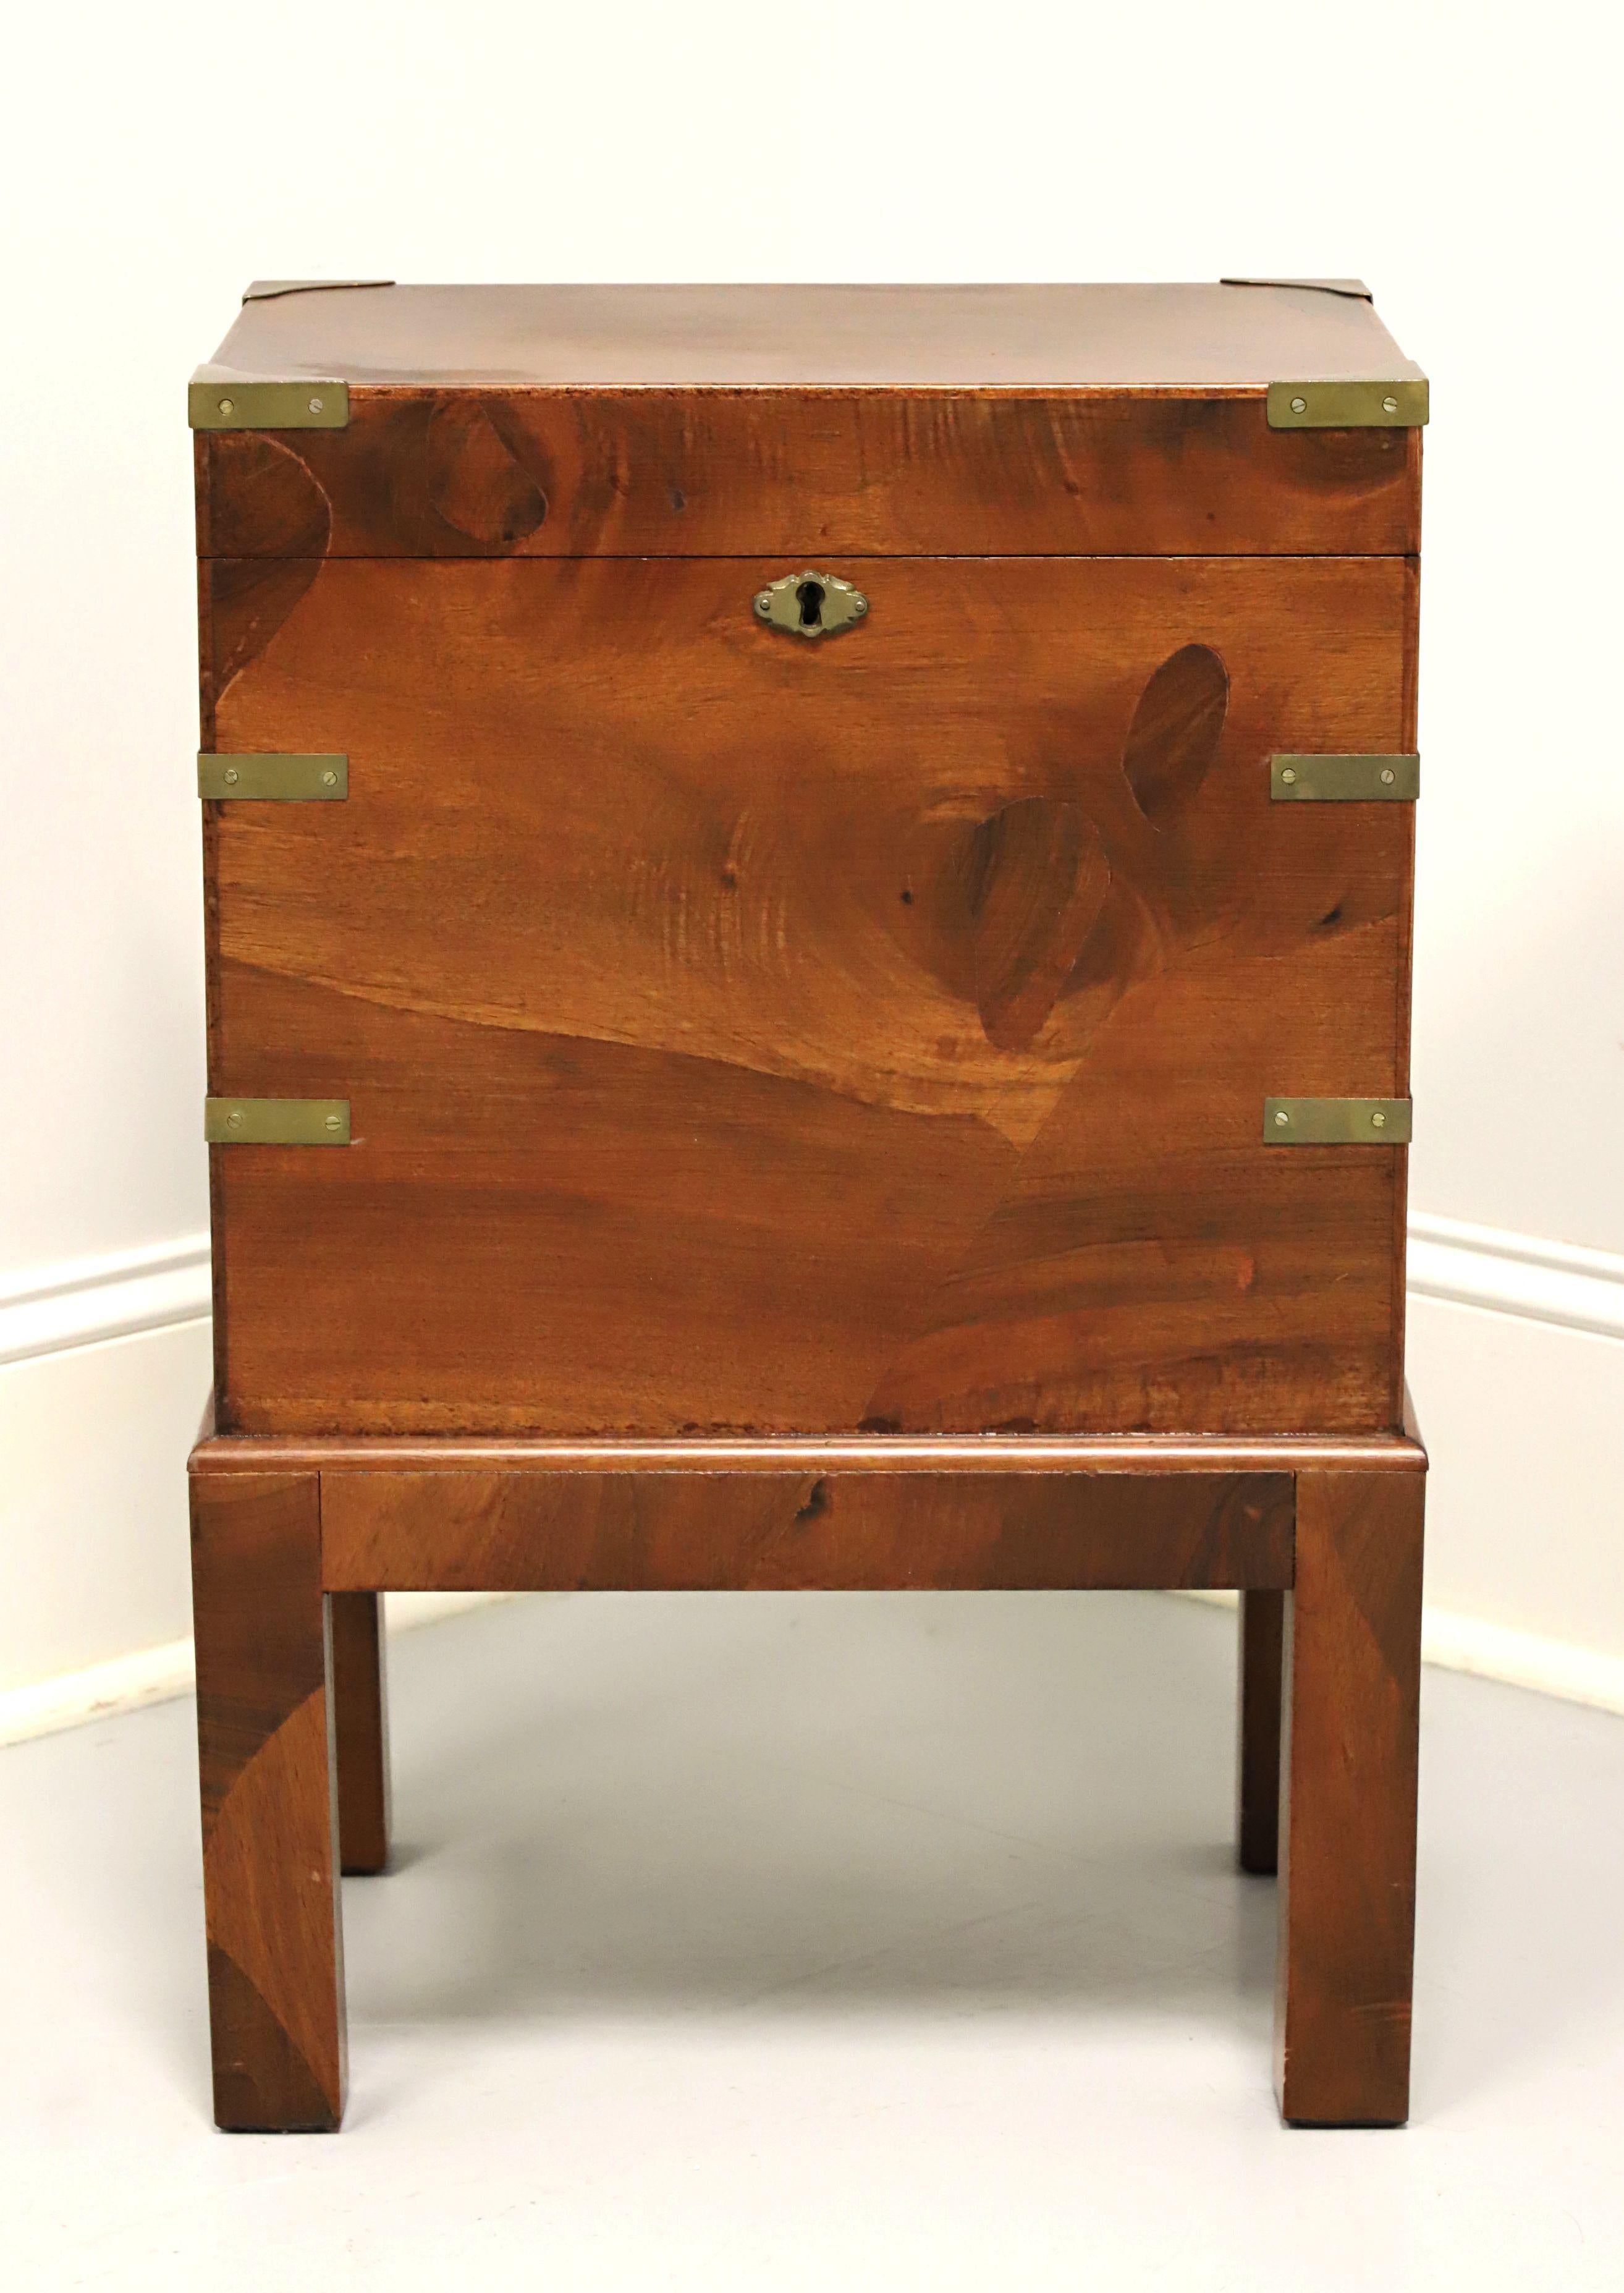 An Asian influenced Campaign style decorative chest affixed to stand, unbranded. Walnut, or similar hardwood, lift up lid on a chain, decorative brass accents, and square straight legs. Features a tall interior suitable for wine bottle or other